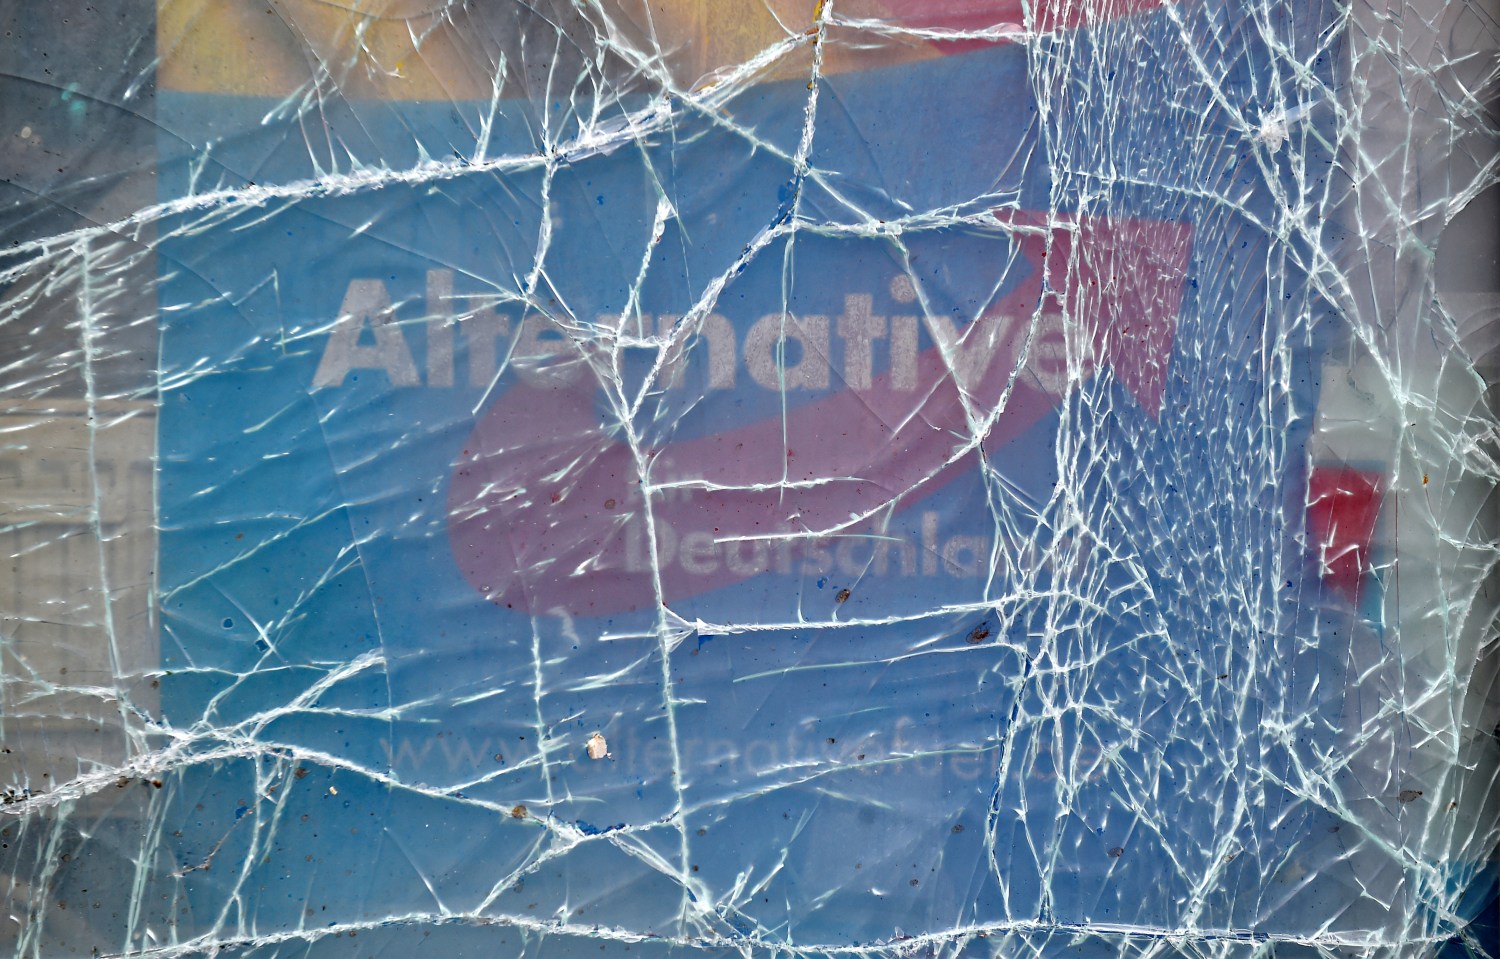 A damaged window of the office of the Alternative for Germany (AfD) far-right party is pictured in the city of Doebeln, Germany, January 4, 2019, one day after an explosion set the office on fire and damaged vehicles and nearby buildings.     REUTERS/Matthias Rietschel - RC1972A5B3D0